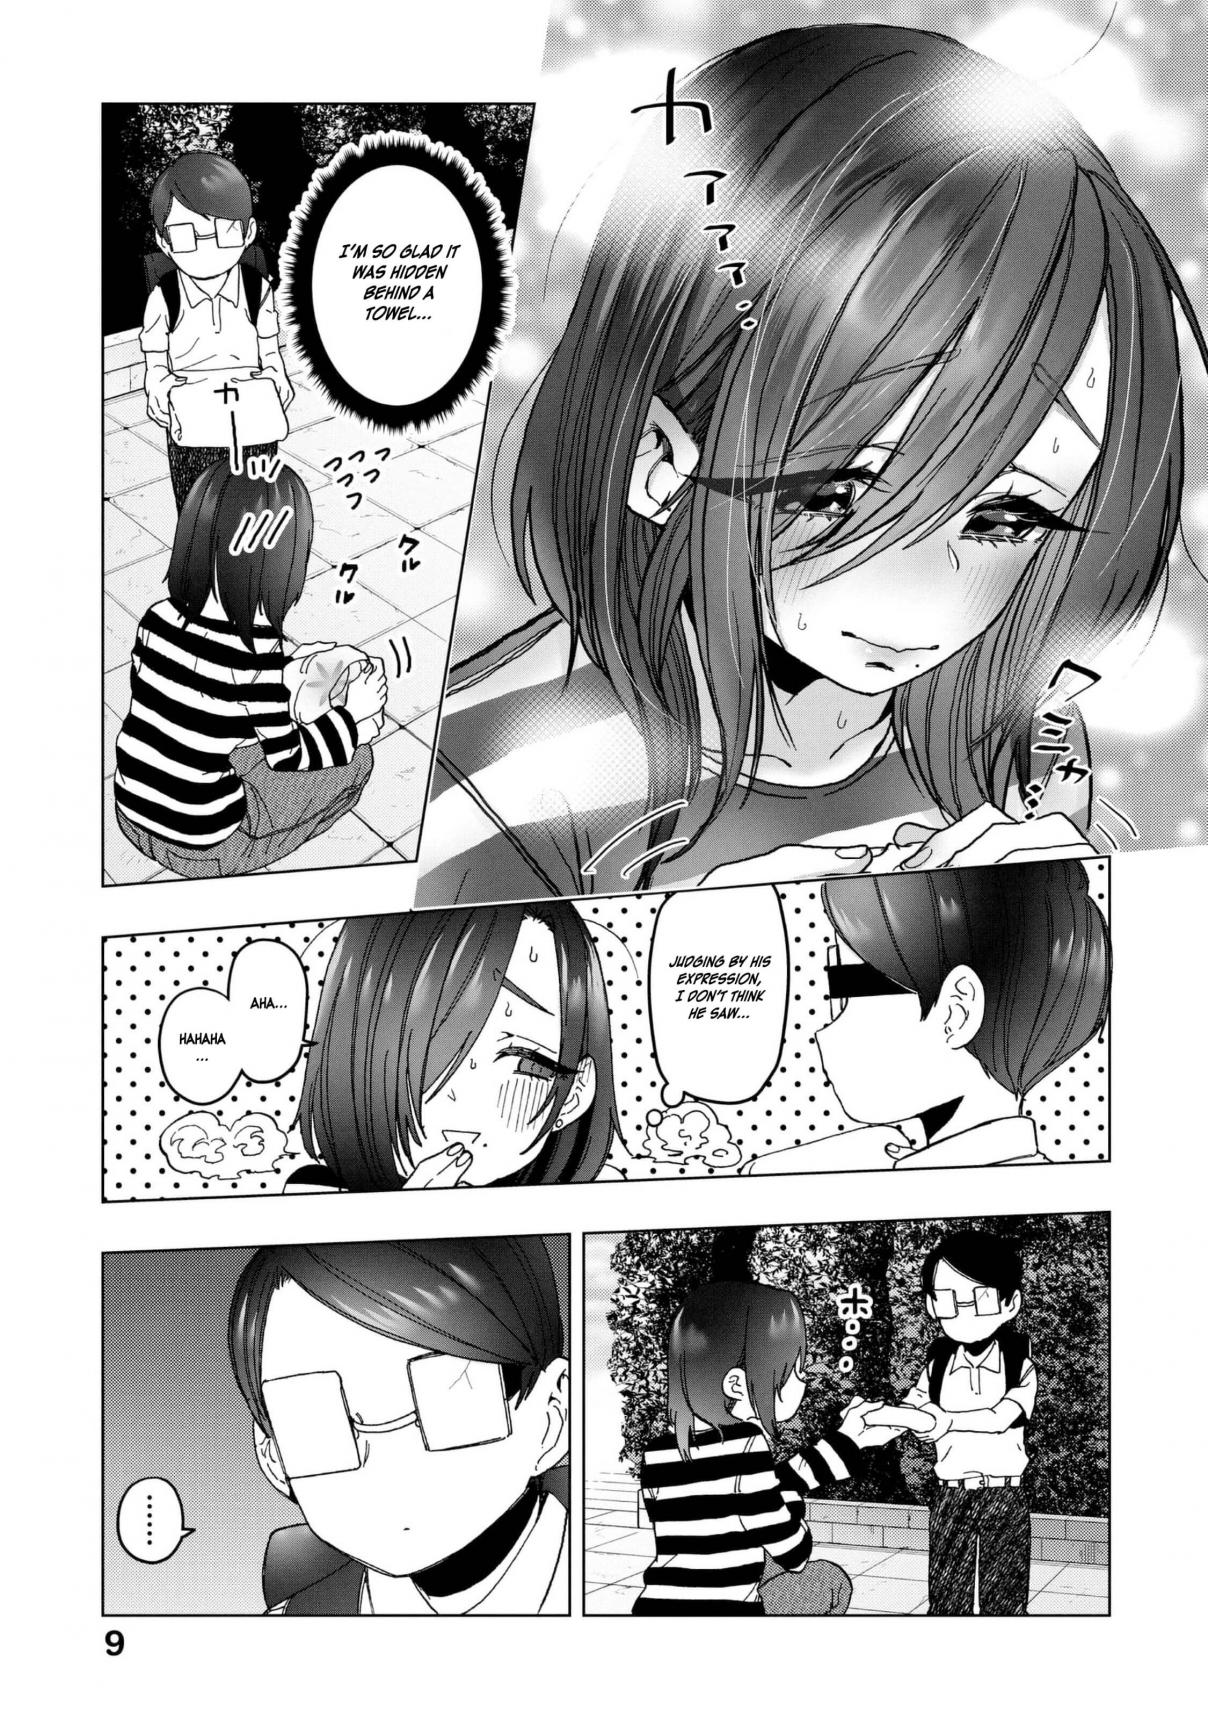 Eguchi kun Doesn't Miss a Thing Vol. 4 Ch. 17 Nothing Ventured, Nothing Gained